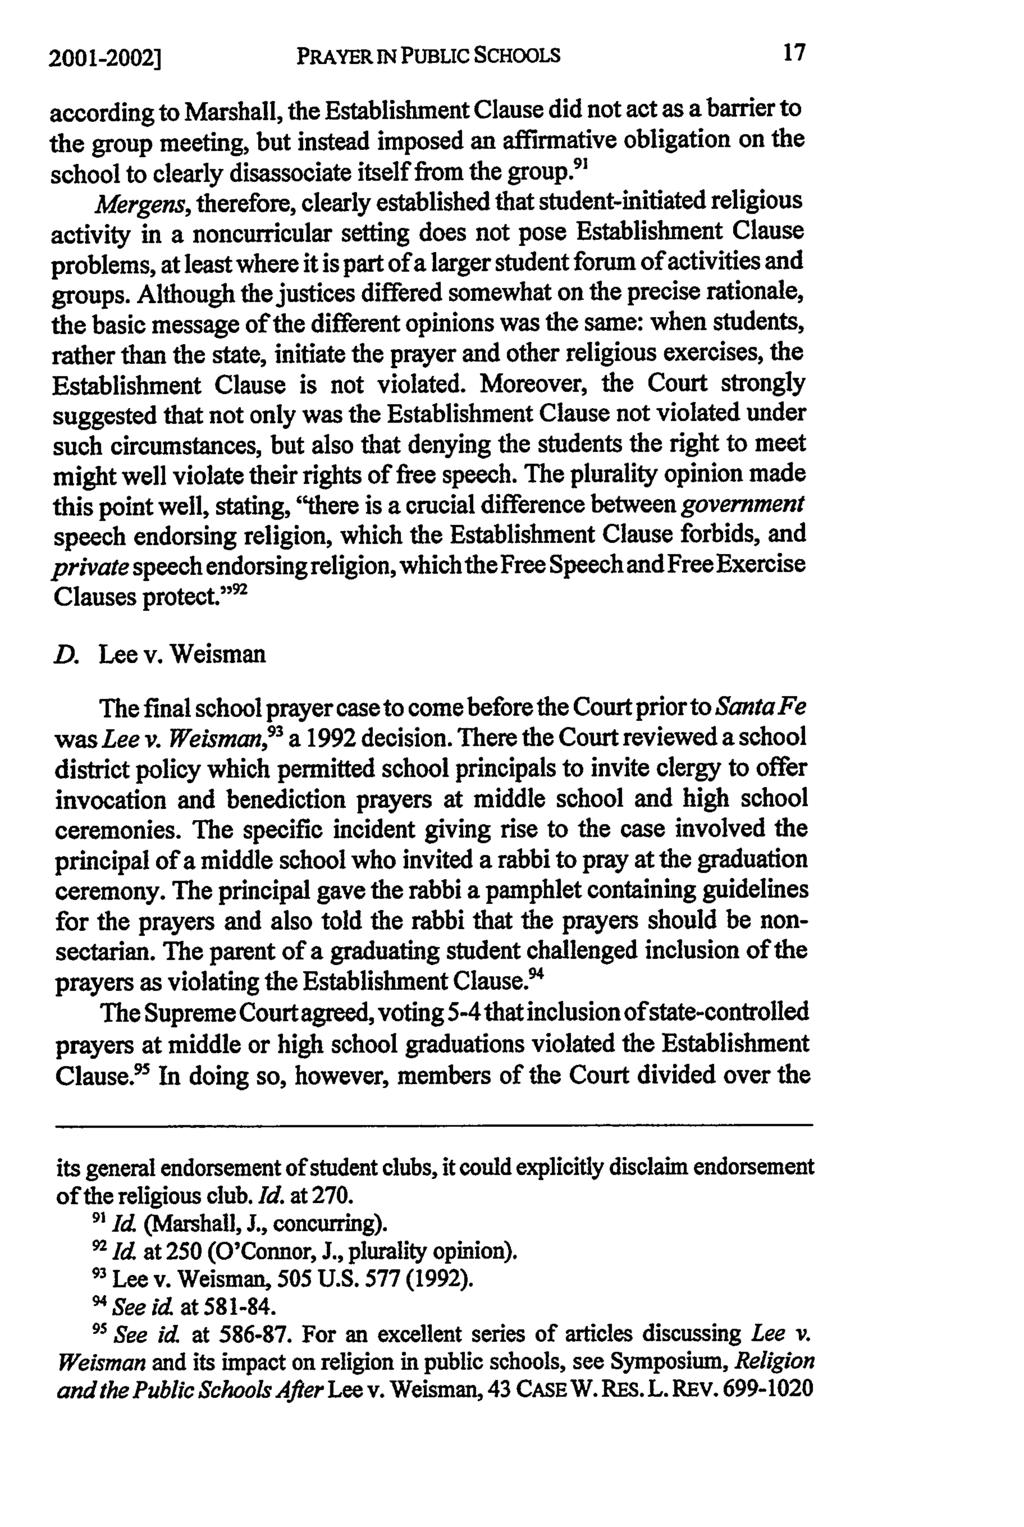 2001-20021 PRAYER IN PUBLIC SCHOOLS according to Marshall, the Establishment Clause did not act as a barrier to the group meeting, but instead imposed an affirmative obligation on the school to